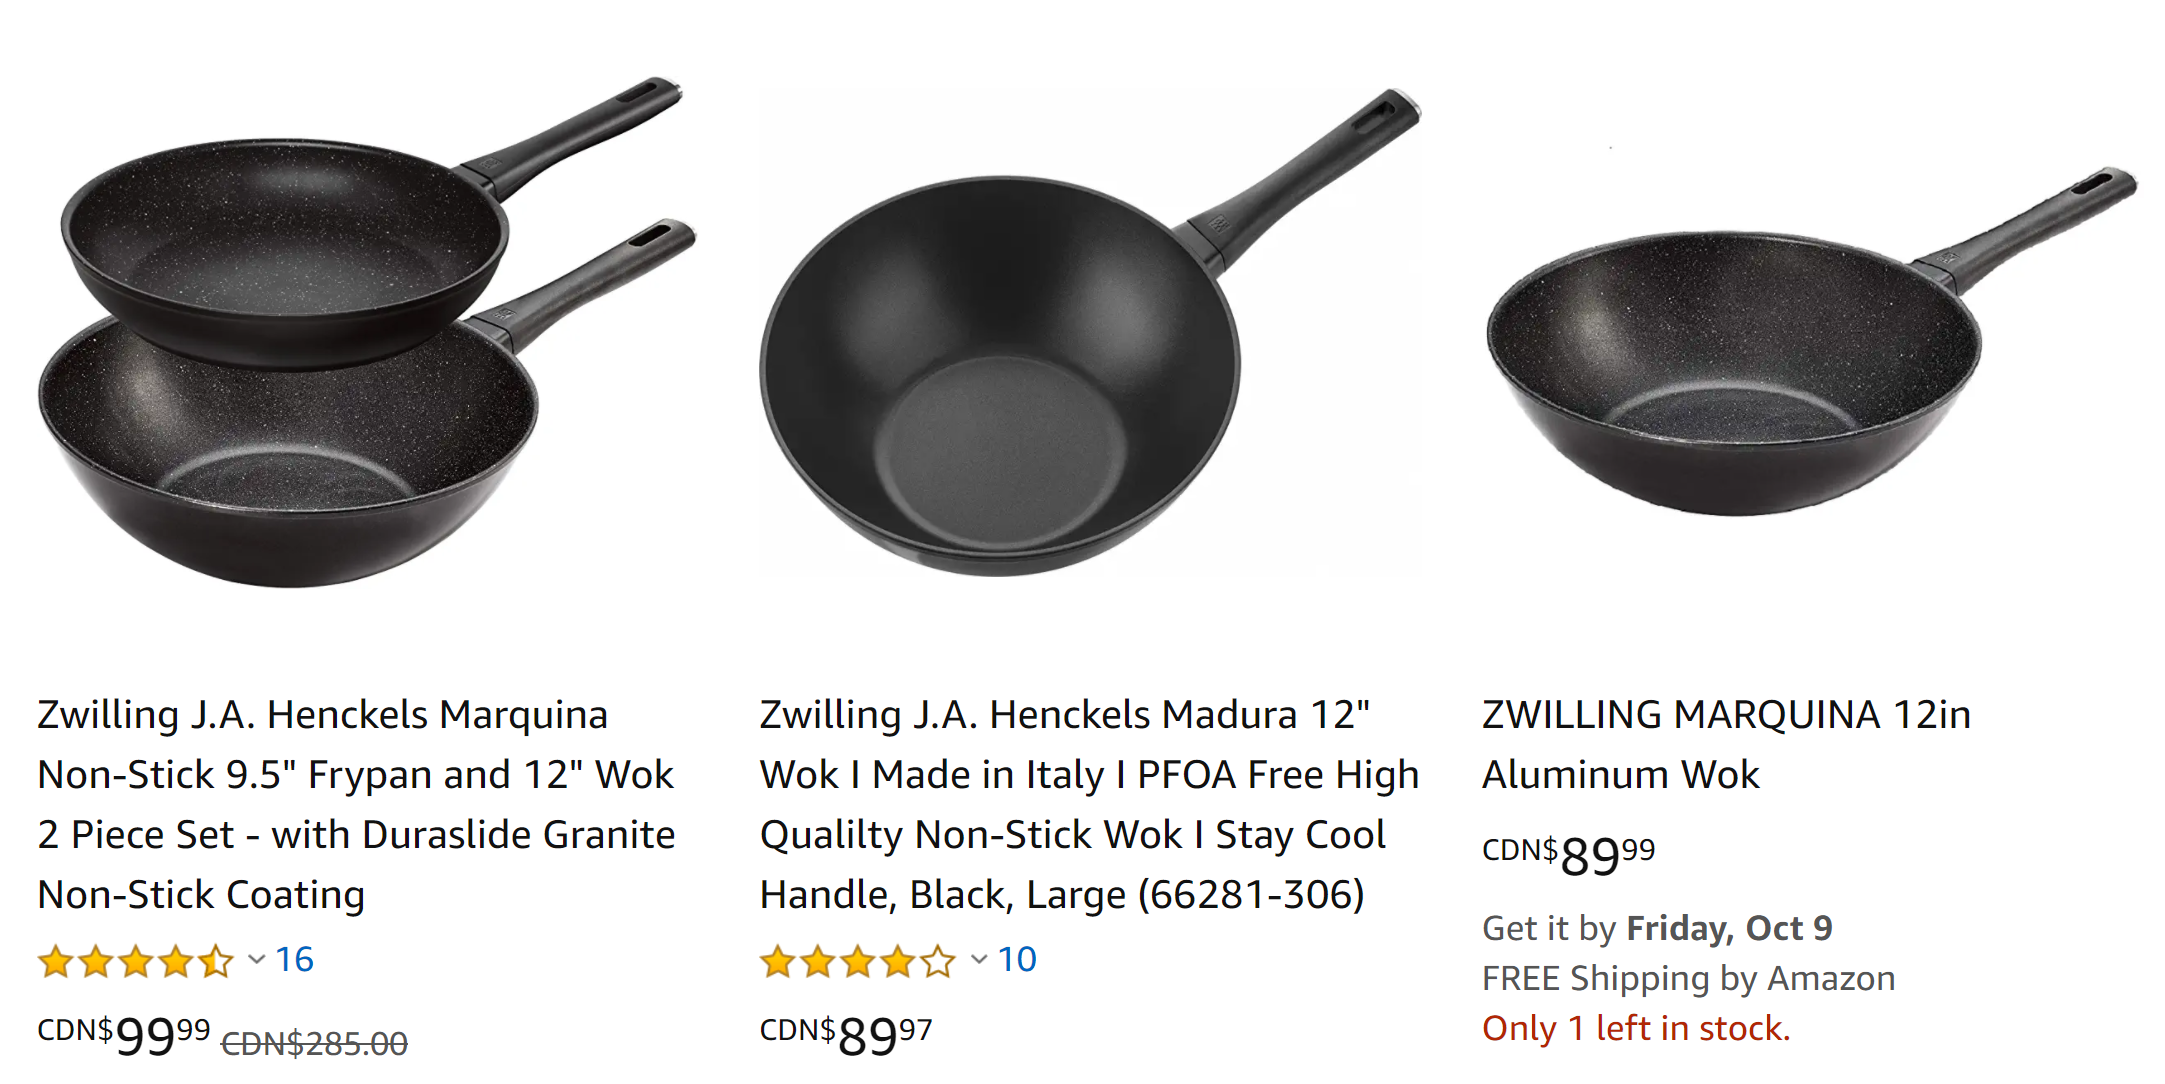 zwilling-double-person-frying-pan-pan-2-piece-set-99-2020-10-8